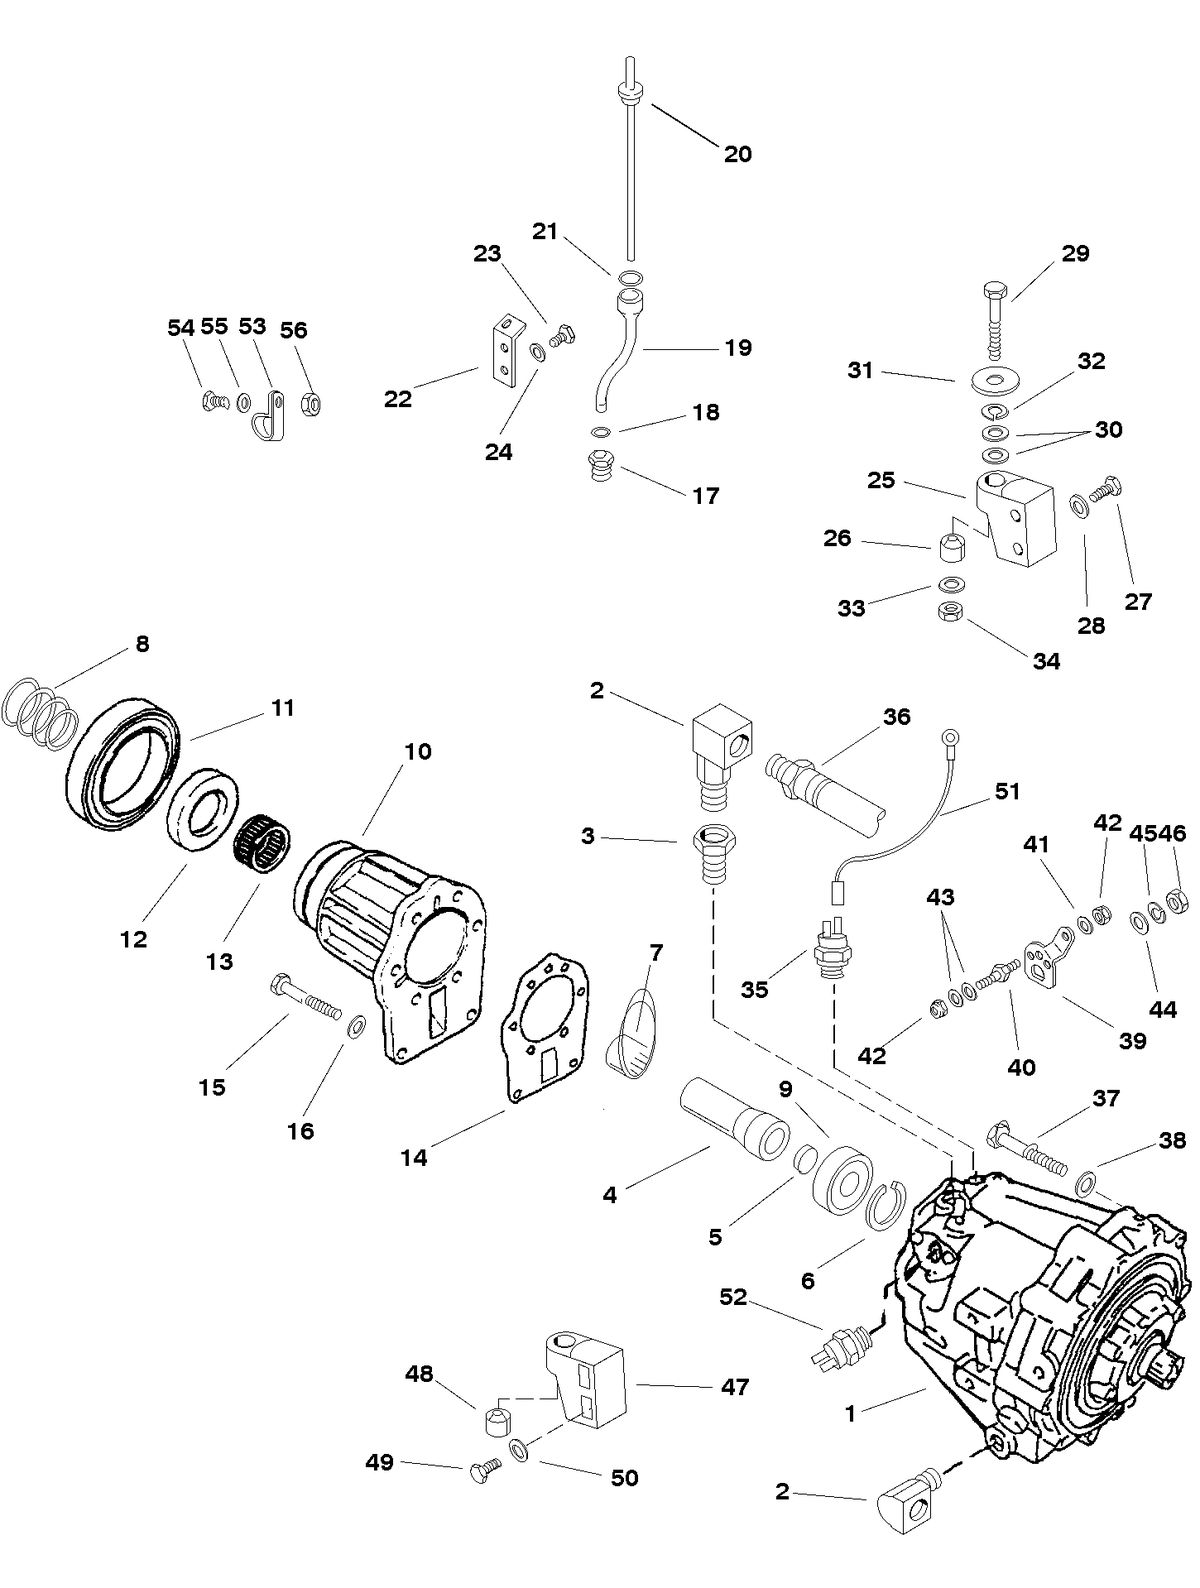 RACE STERNDRIVE HP 500 BULLDOG (540 CID) TRANSMISSION AND COMPONENTS (III AND V DRIVE) (BRAVO) -PG 2